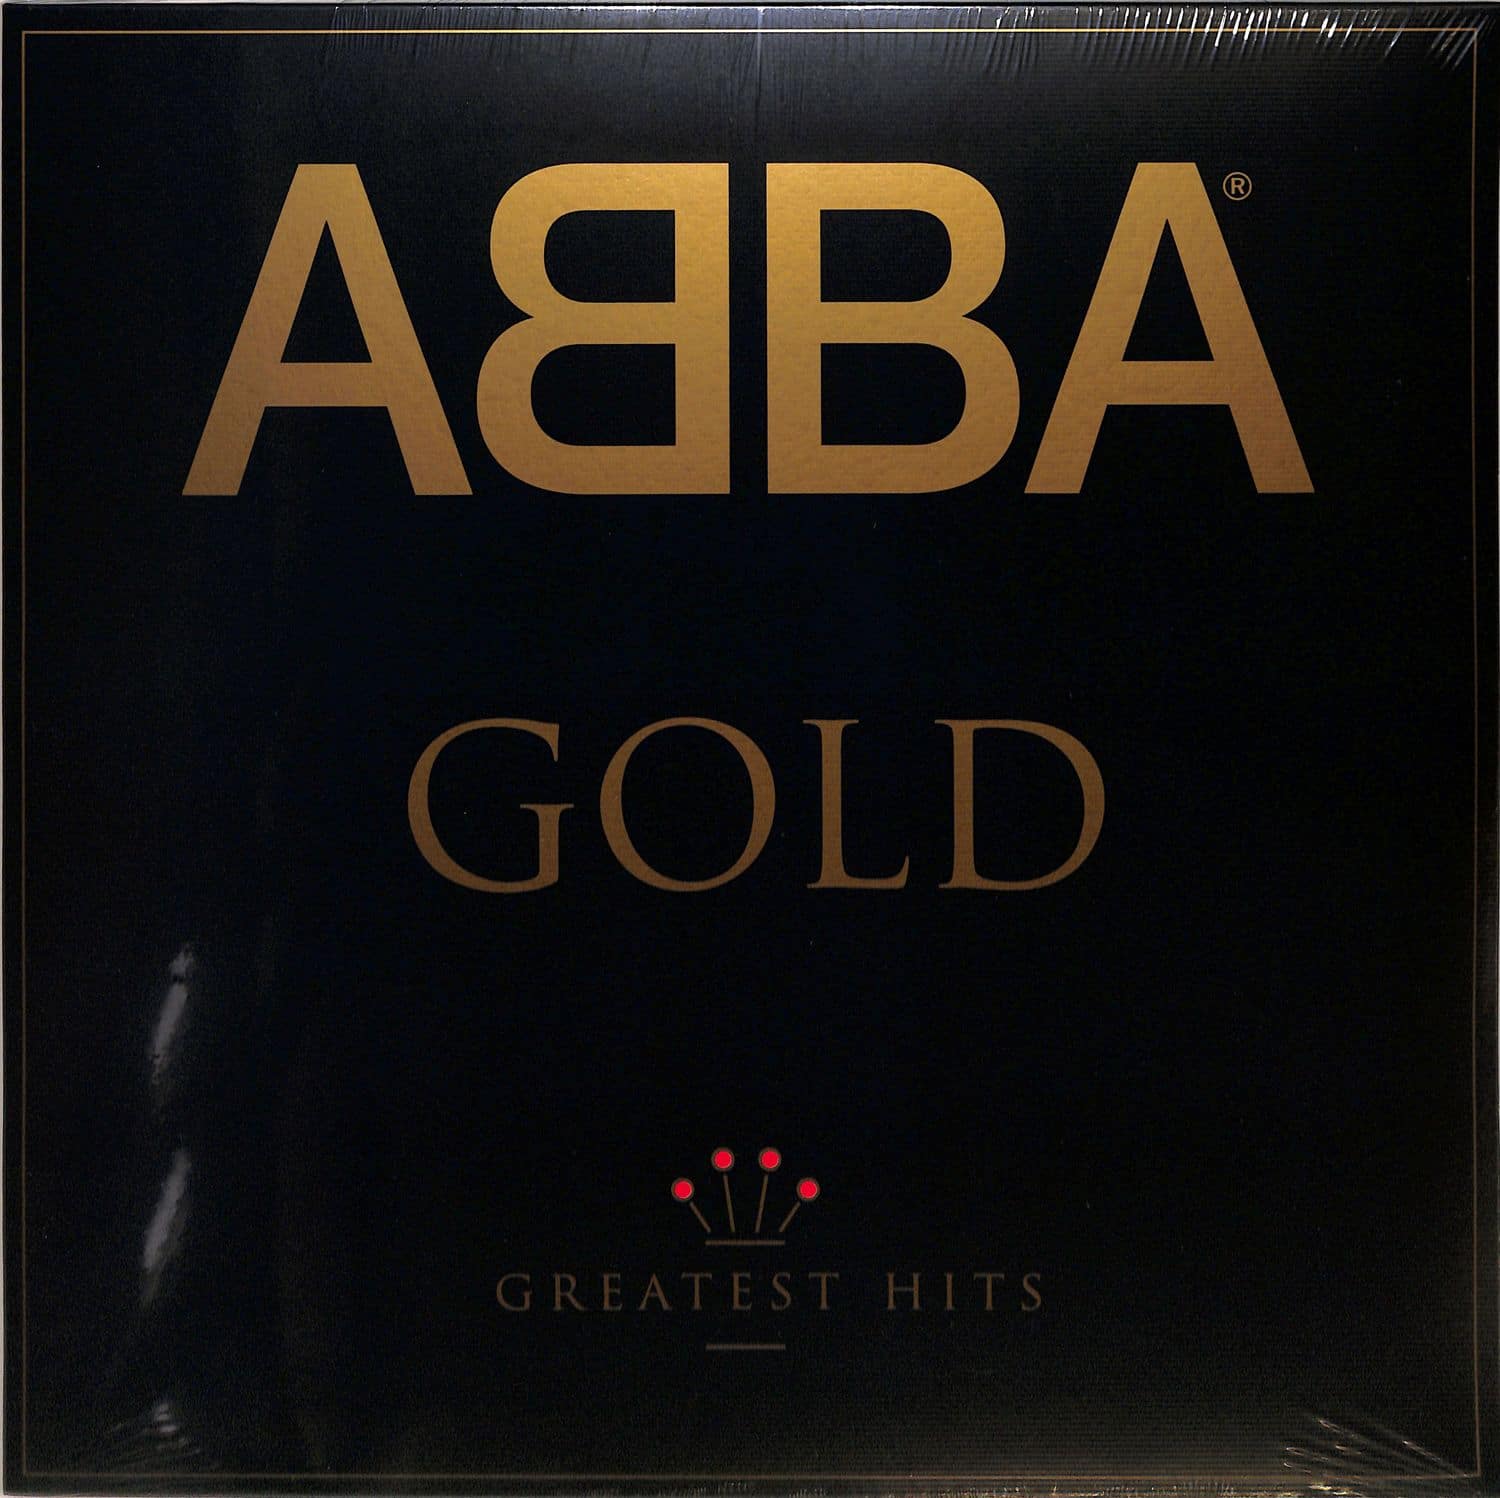 Abba - GOLD - GREATEST HITS 